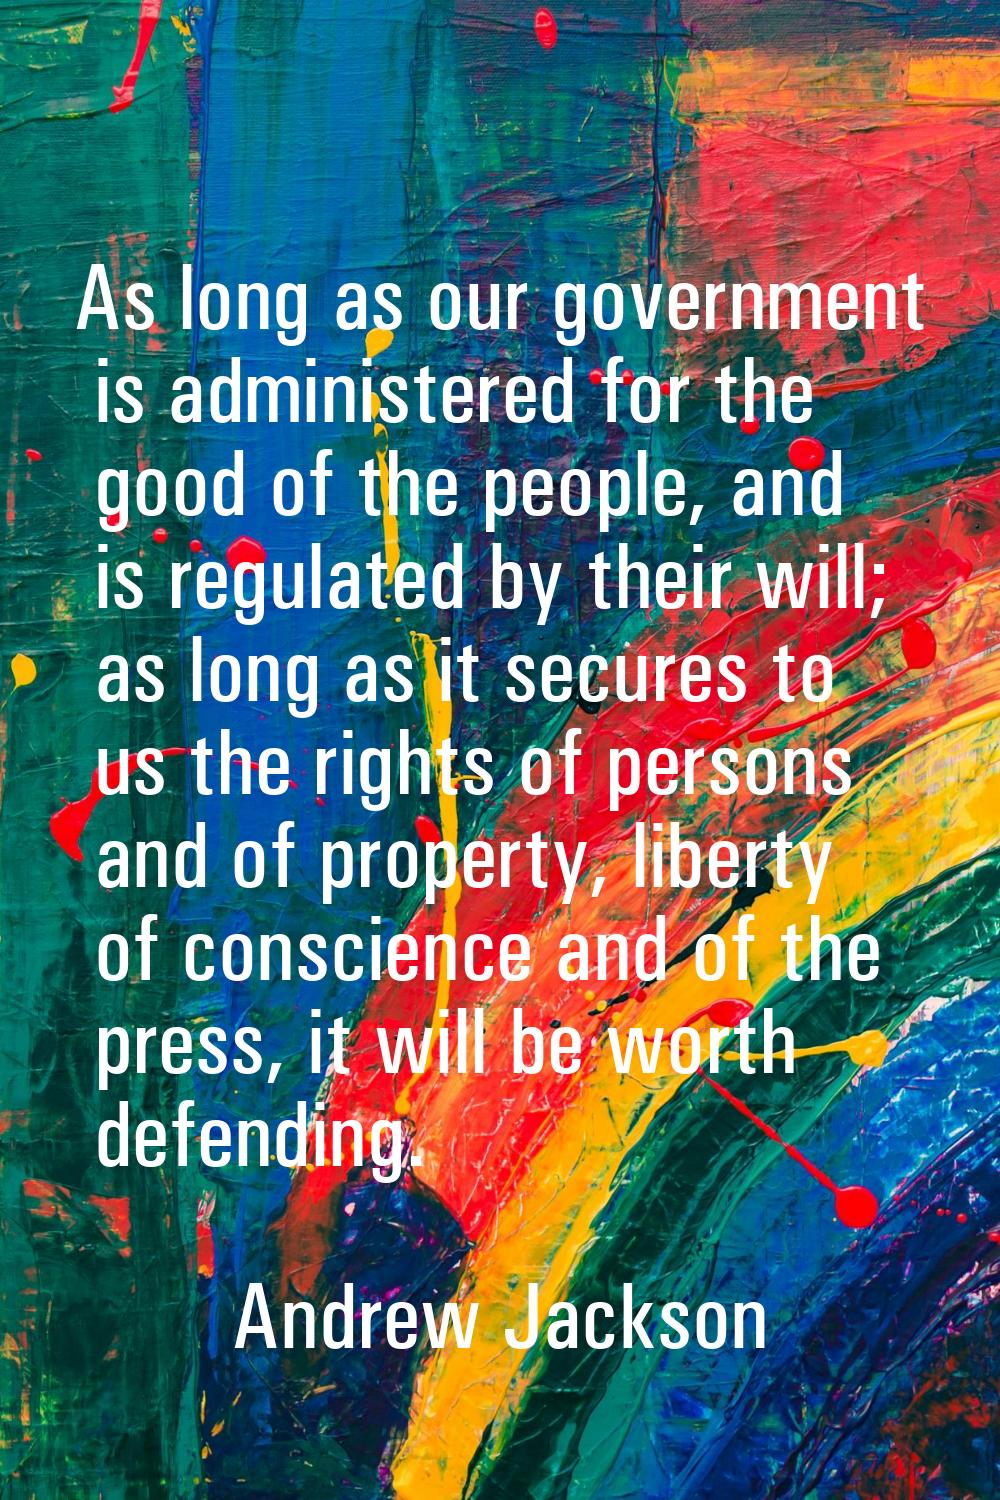 As long as our government is administered for the good of the people, and is regulated by their wil